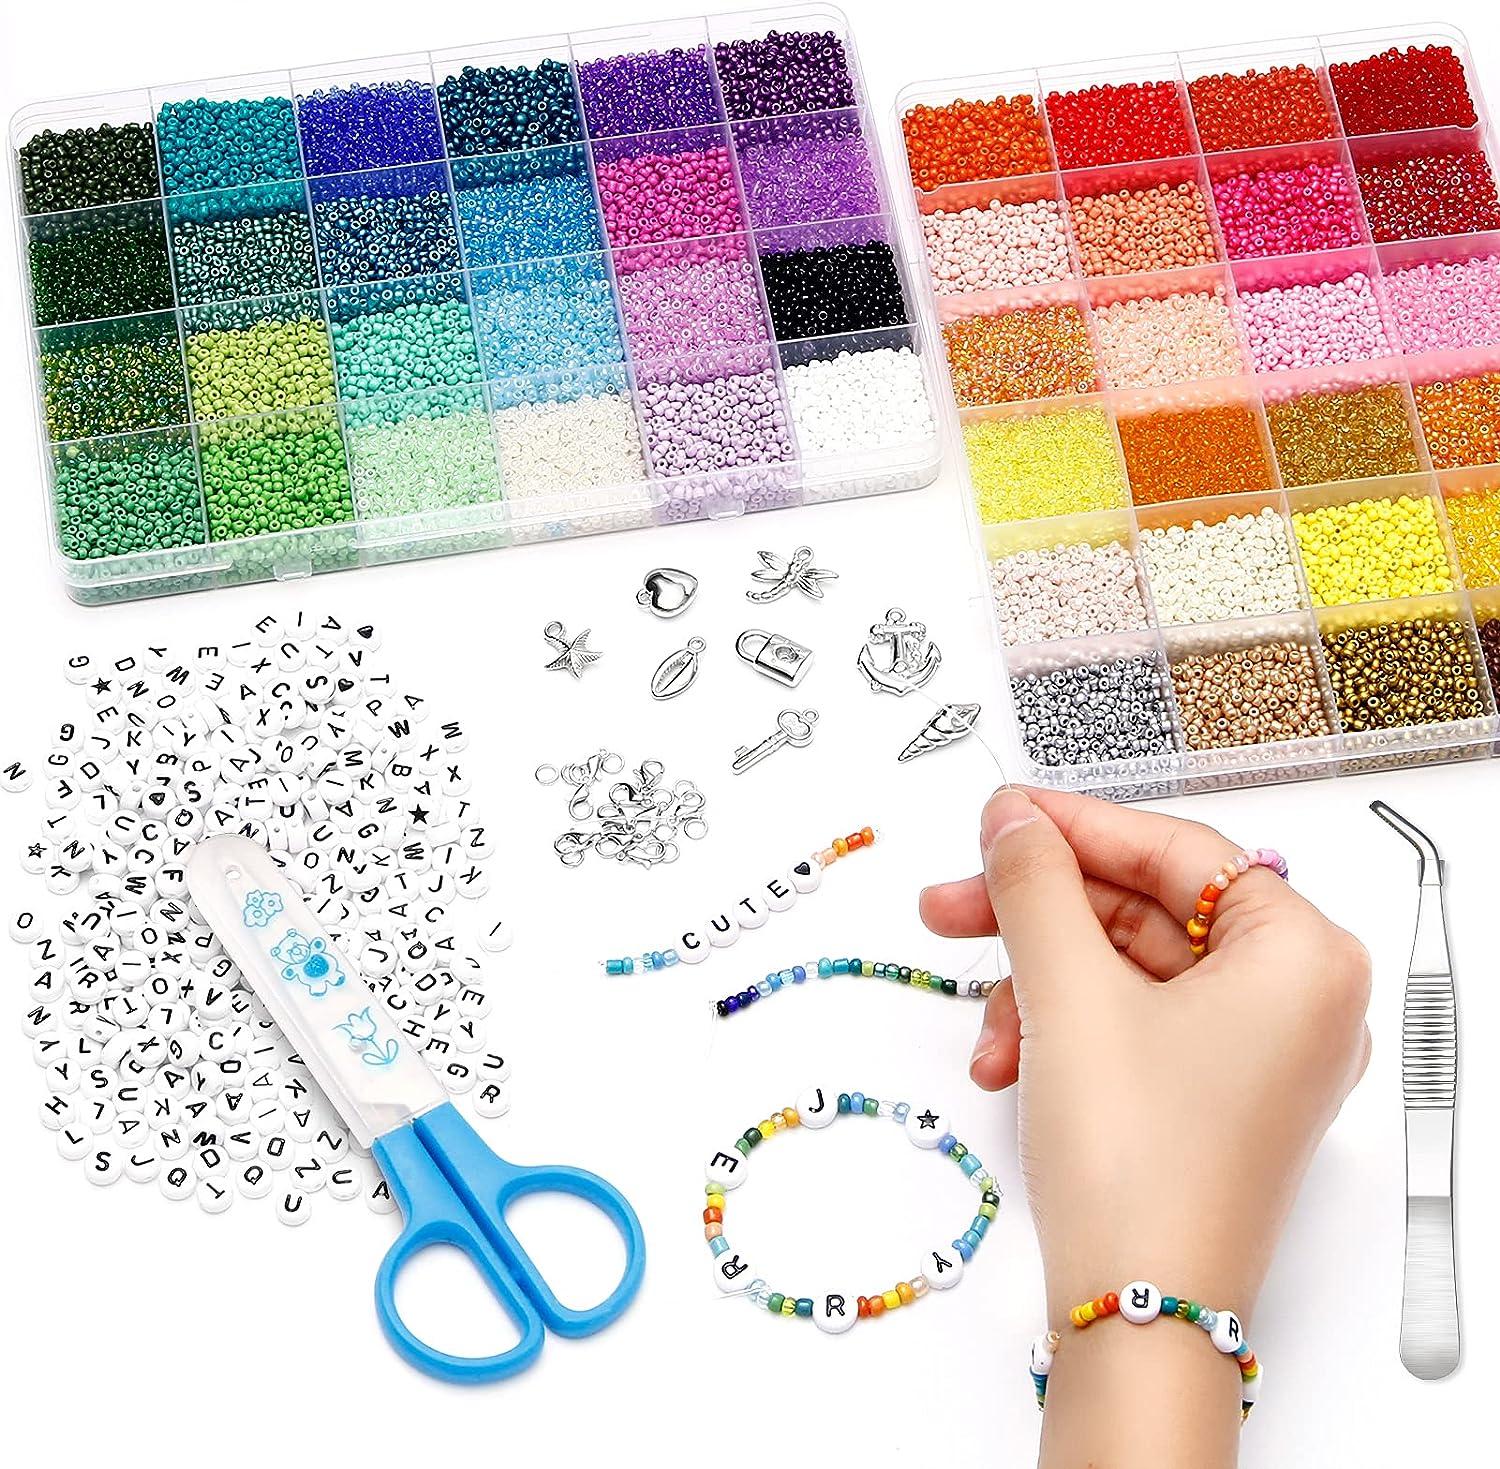 Acrylic Seed Beads 3mm Small Beads Set for Jewelry Making Beading Supplies